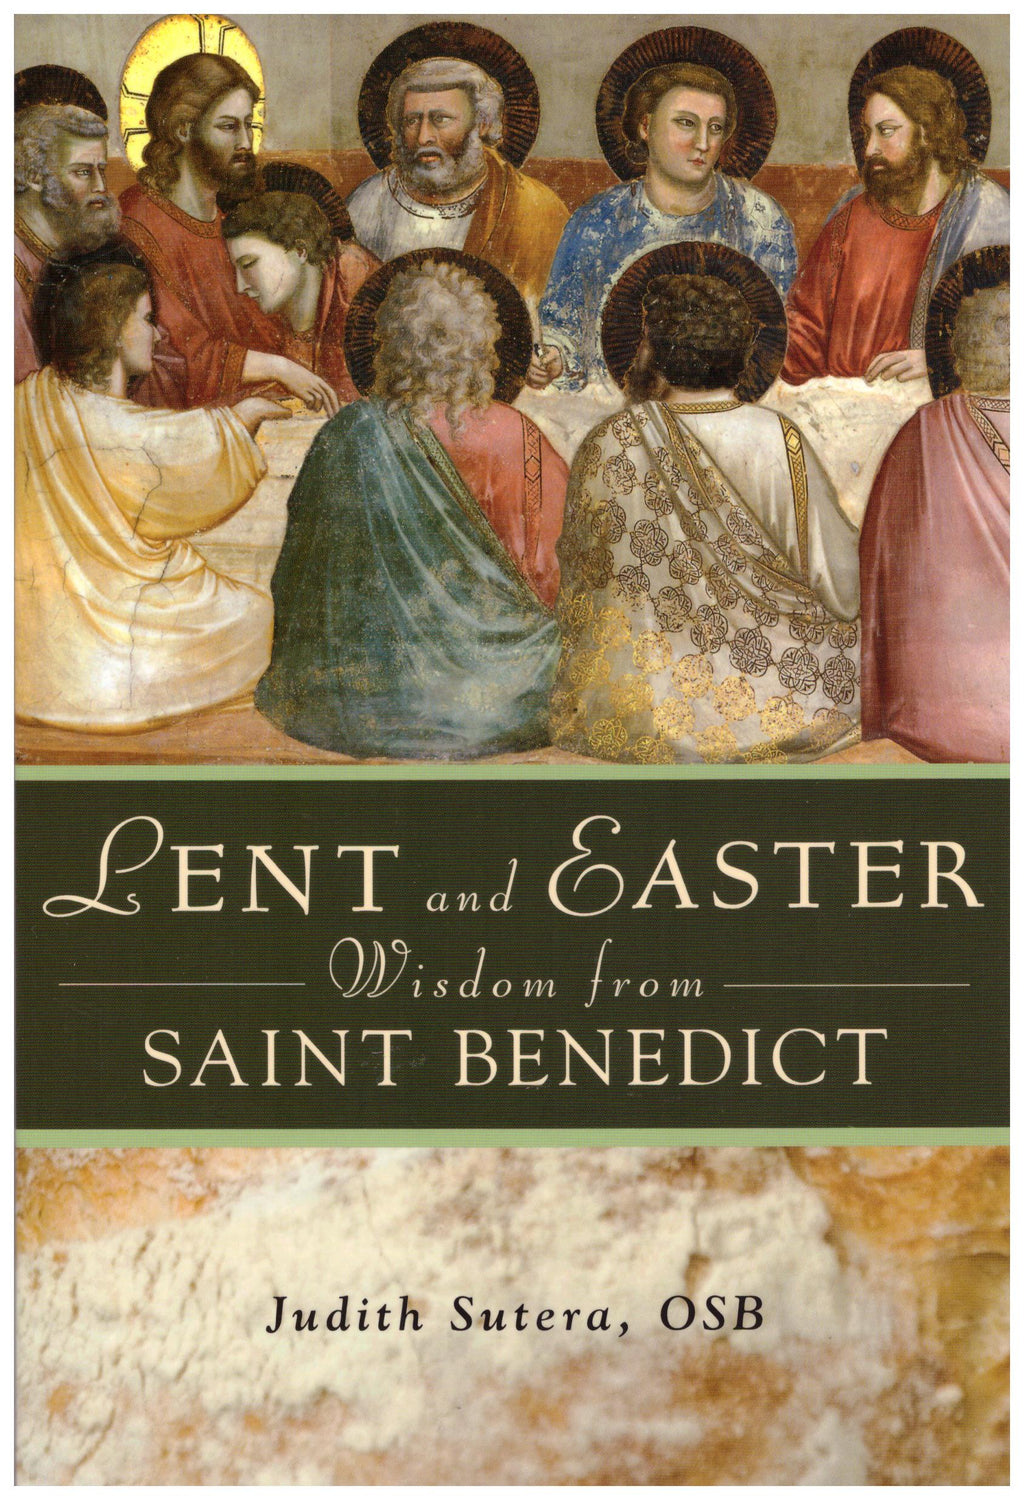 LENT AND EASTER W/ST BENEDICT